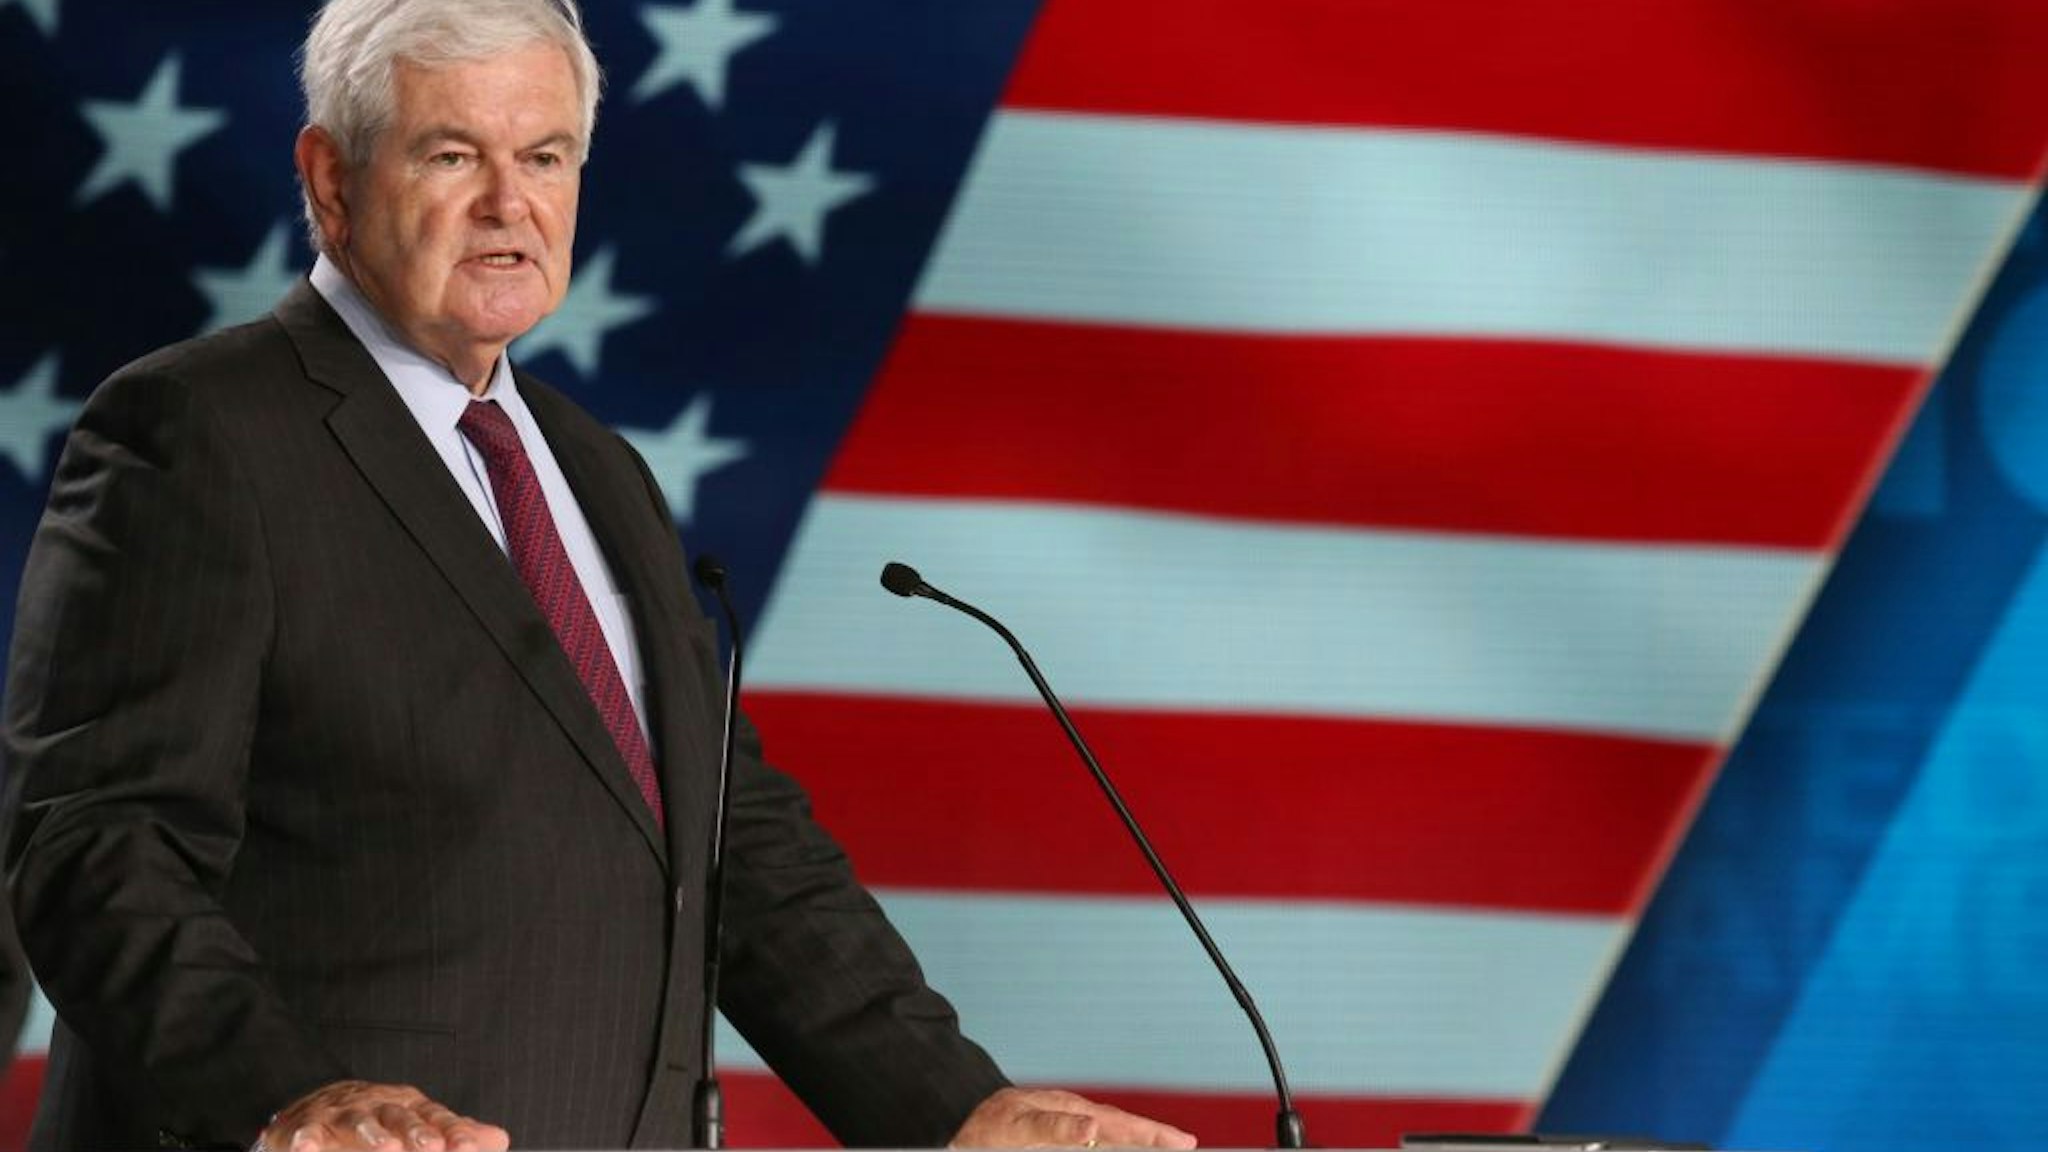 Newt Gingrich, former US Speaker of the House attends "Free Iran 2018 - the Alternative" event organized by exiled Iranian opposition group on June 30, 2018 in Villepinte, north of Paris.